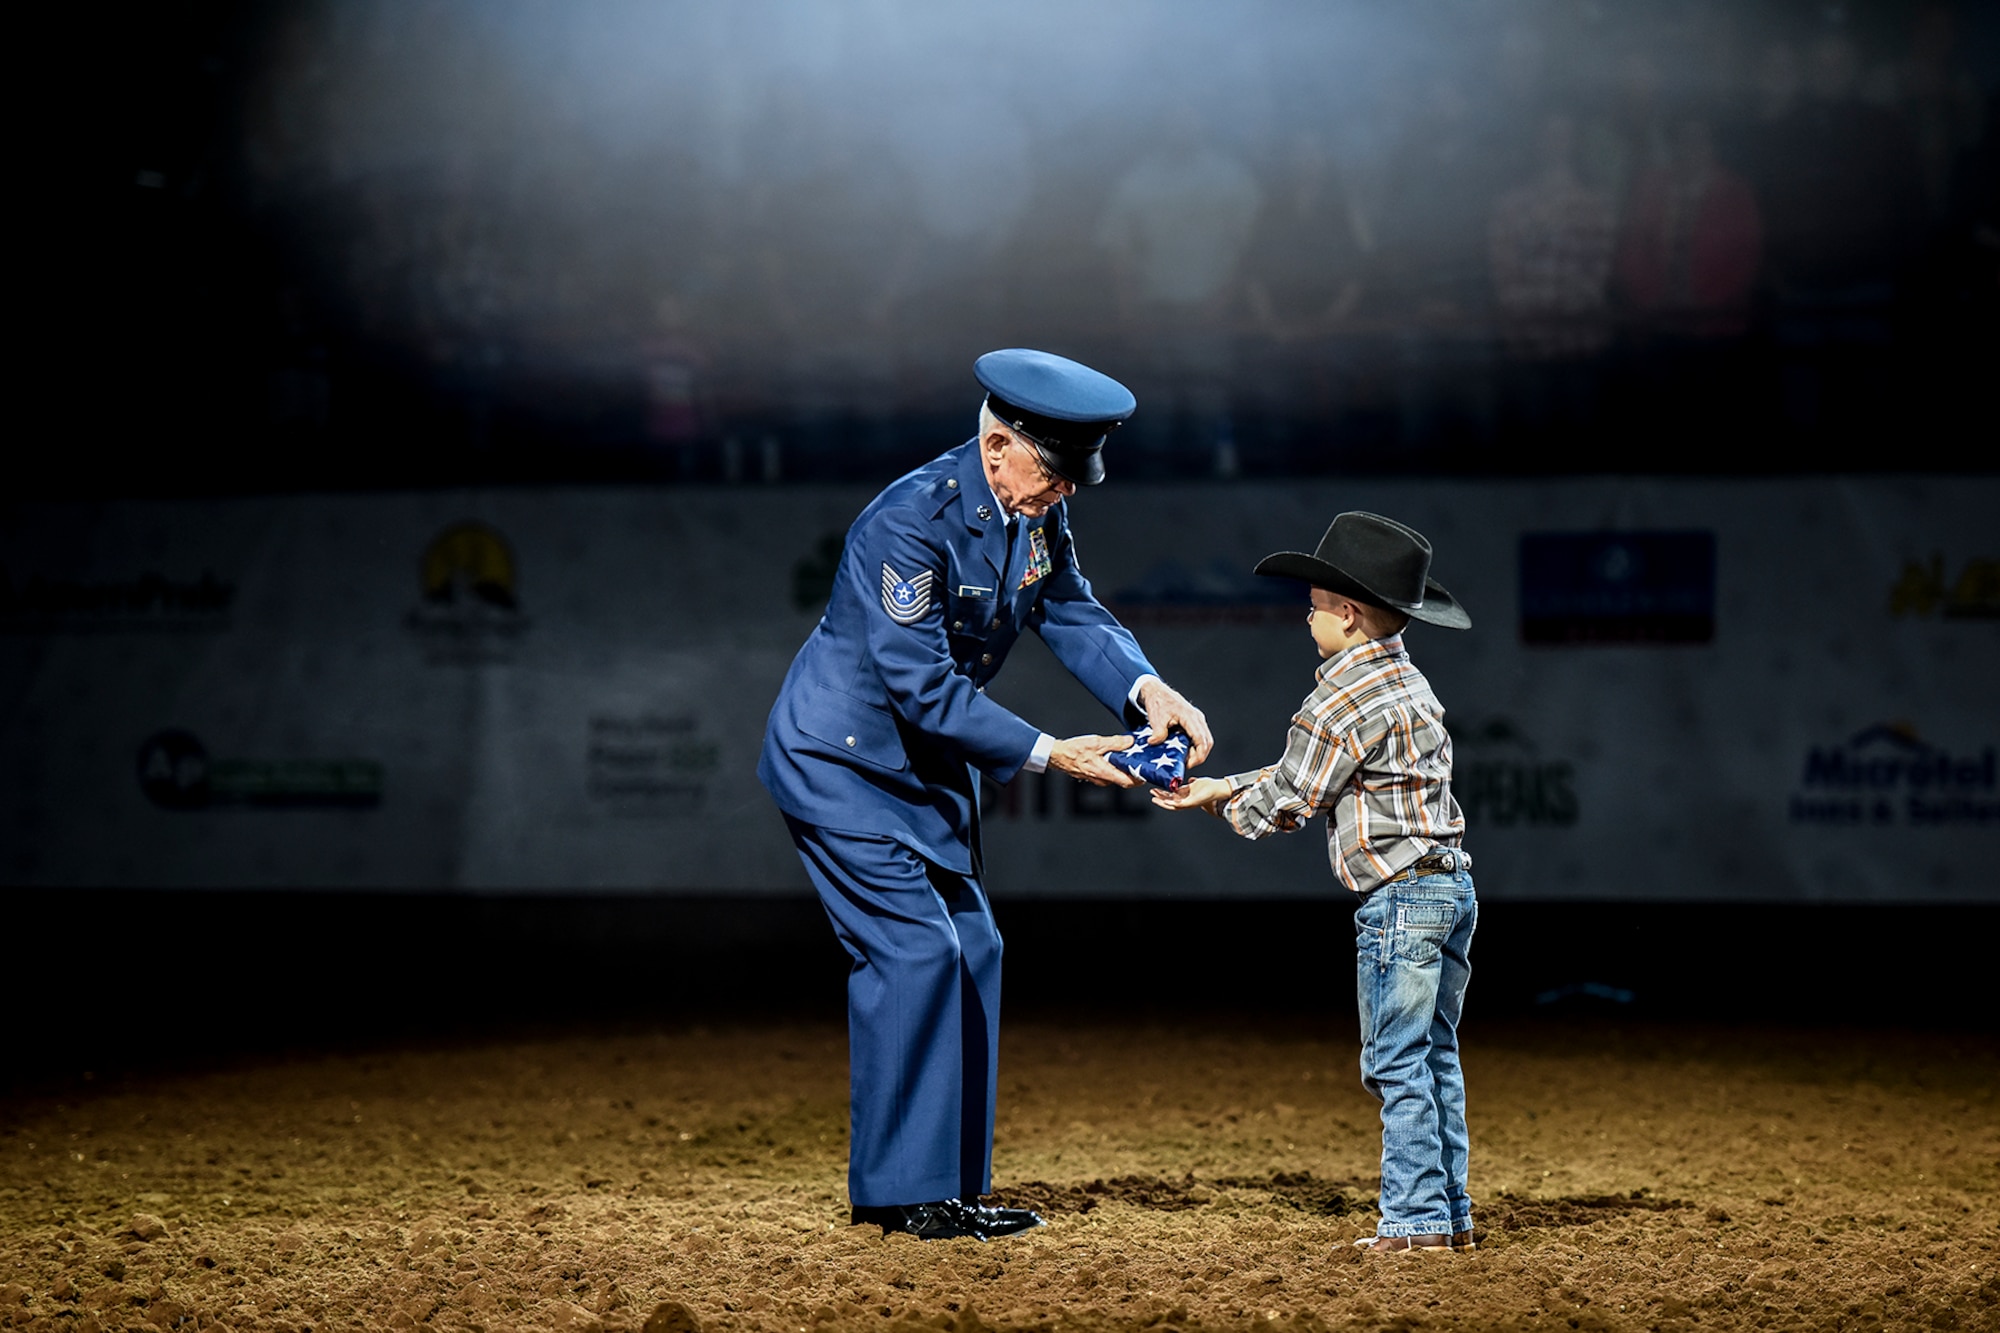 U.S. Army and Air Force veteran Master Sgt. Tom Davis receives a folded American flag from a young local resident during the opening ceremony for Military Appreciation Night as part of the 84th annual San Angelo Stock Show and Rodeo at Foster Communications Coliseum in San Angelo, Texas, Feb. 17, 2016. The rodeo honored military members from all generations. (U.S. Air Force photo by Senior Airman Devin Boyer/Released)